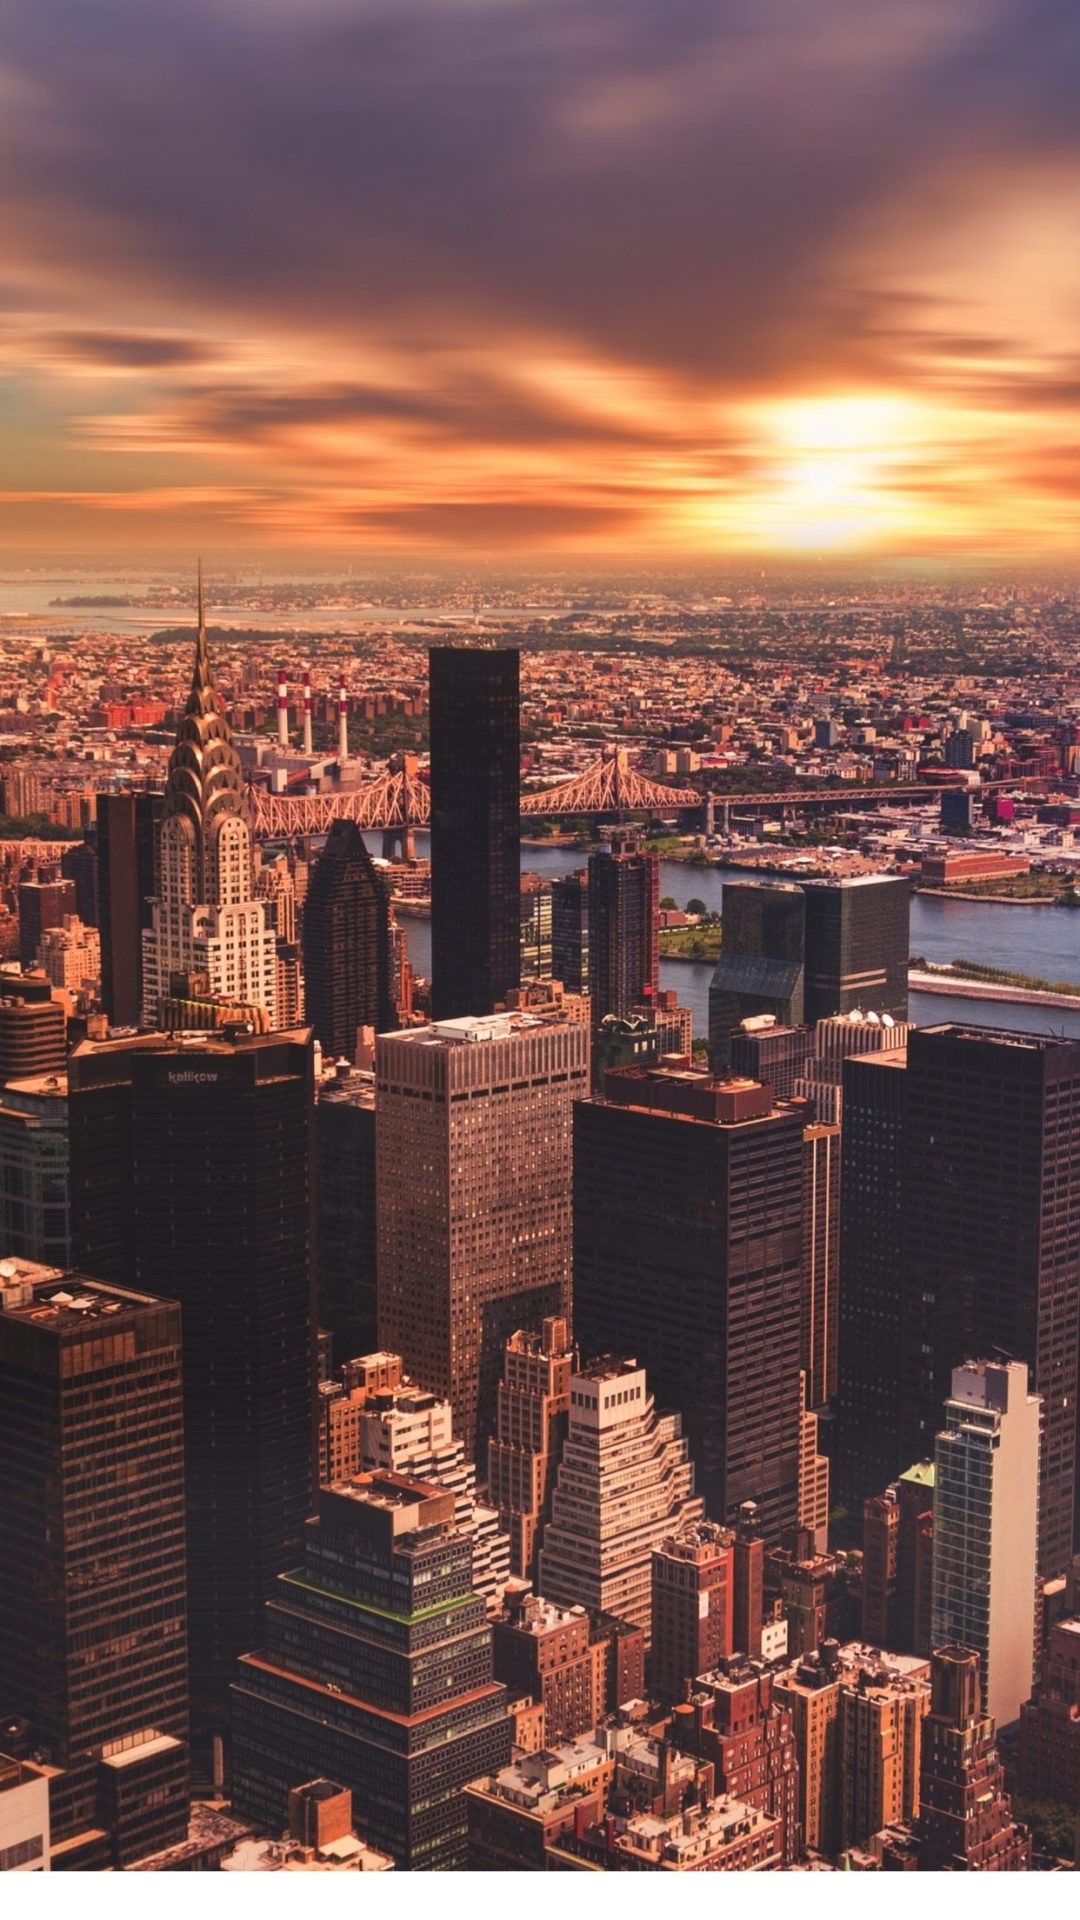 IPhone wallpaper of a cityscape with a sunset in the background - New York, cityscape